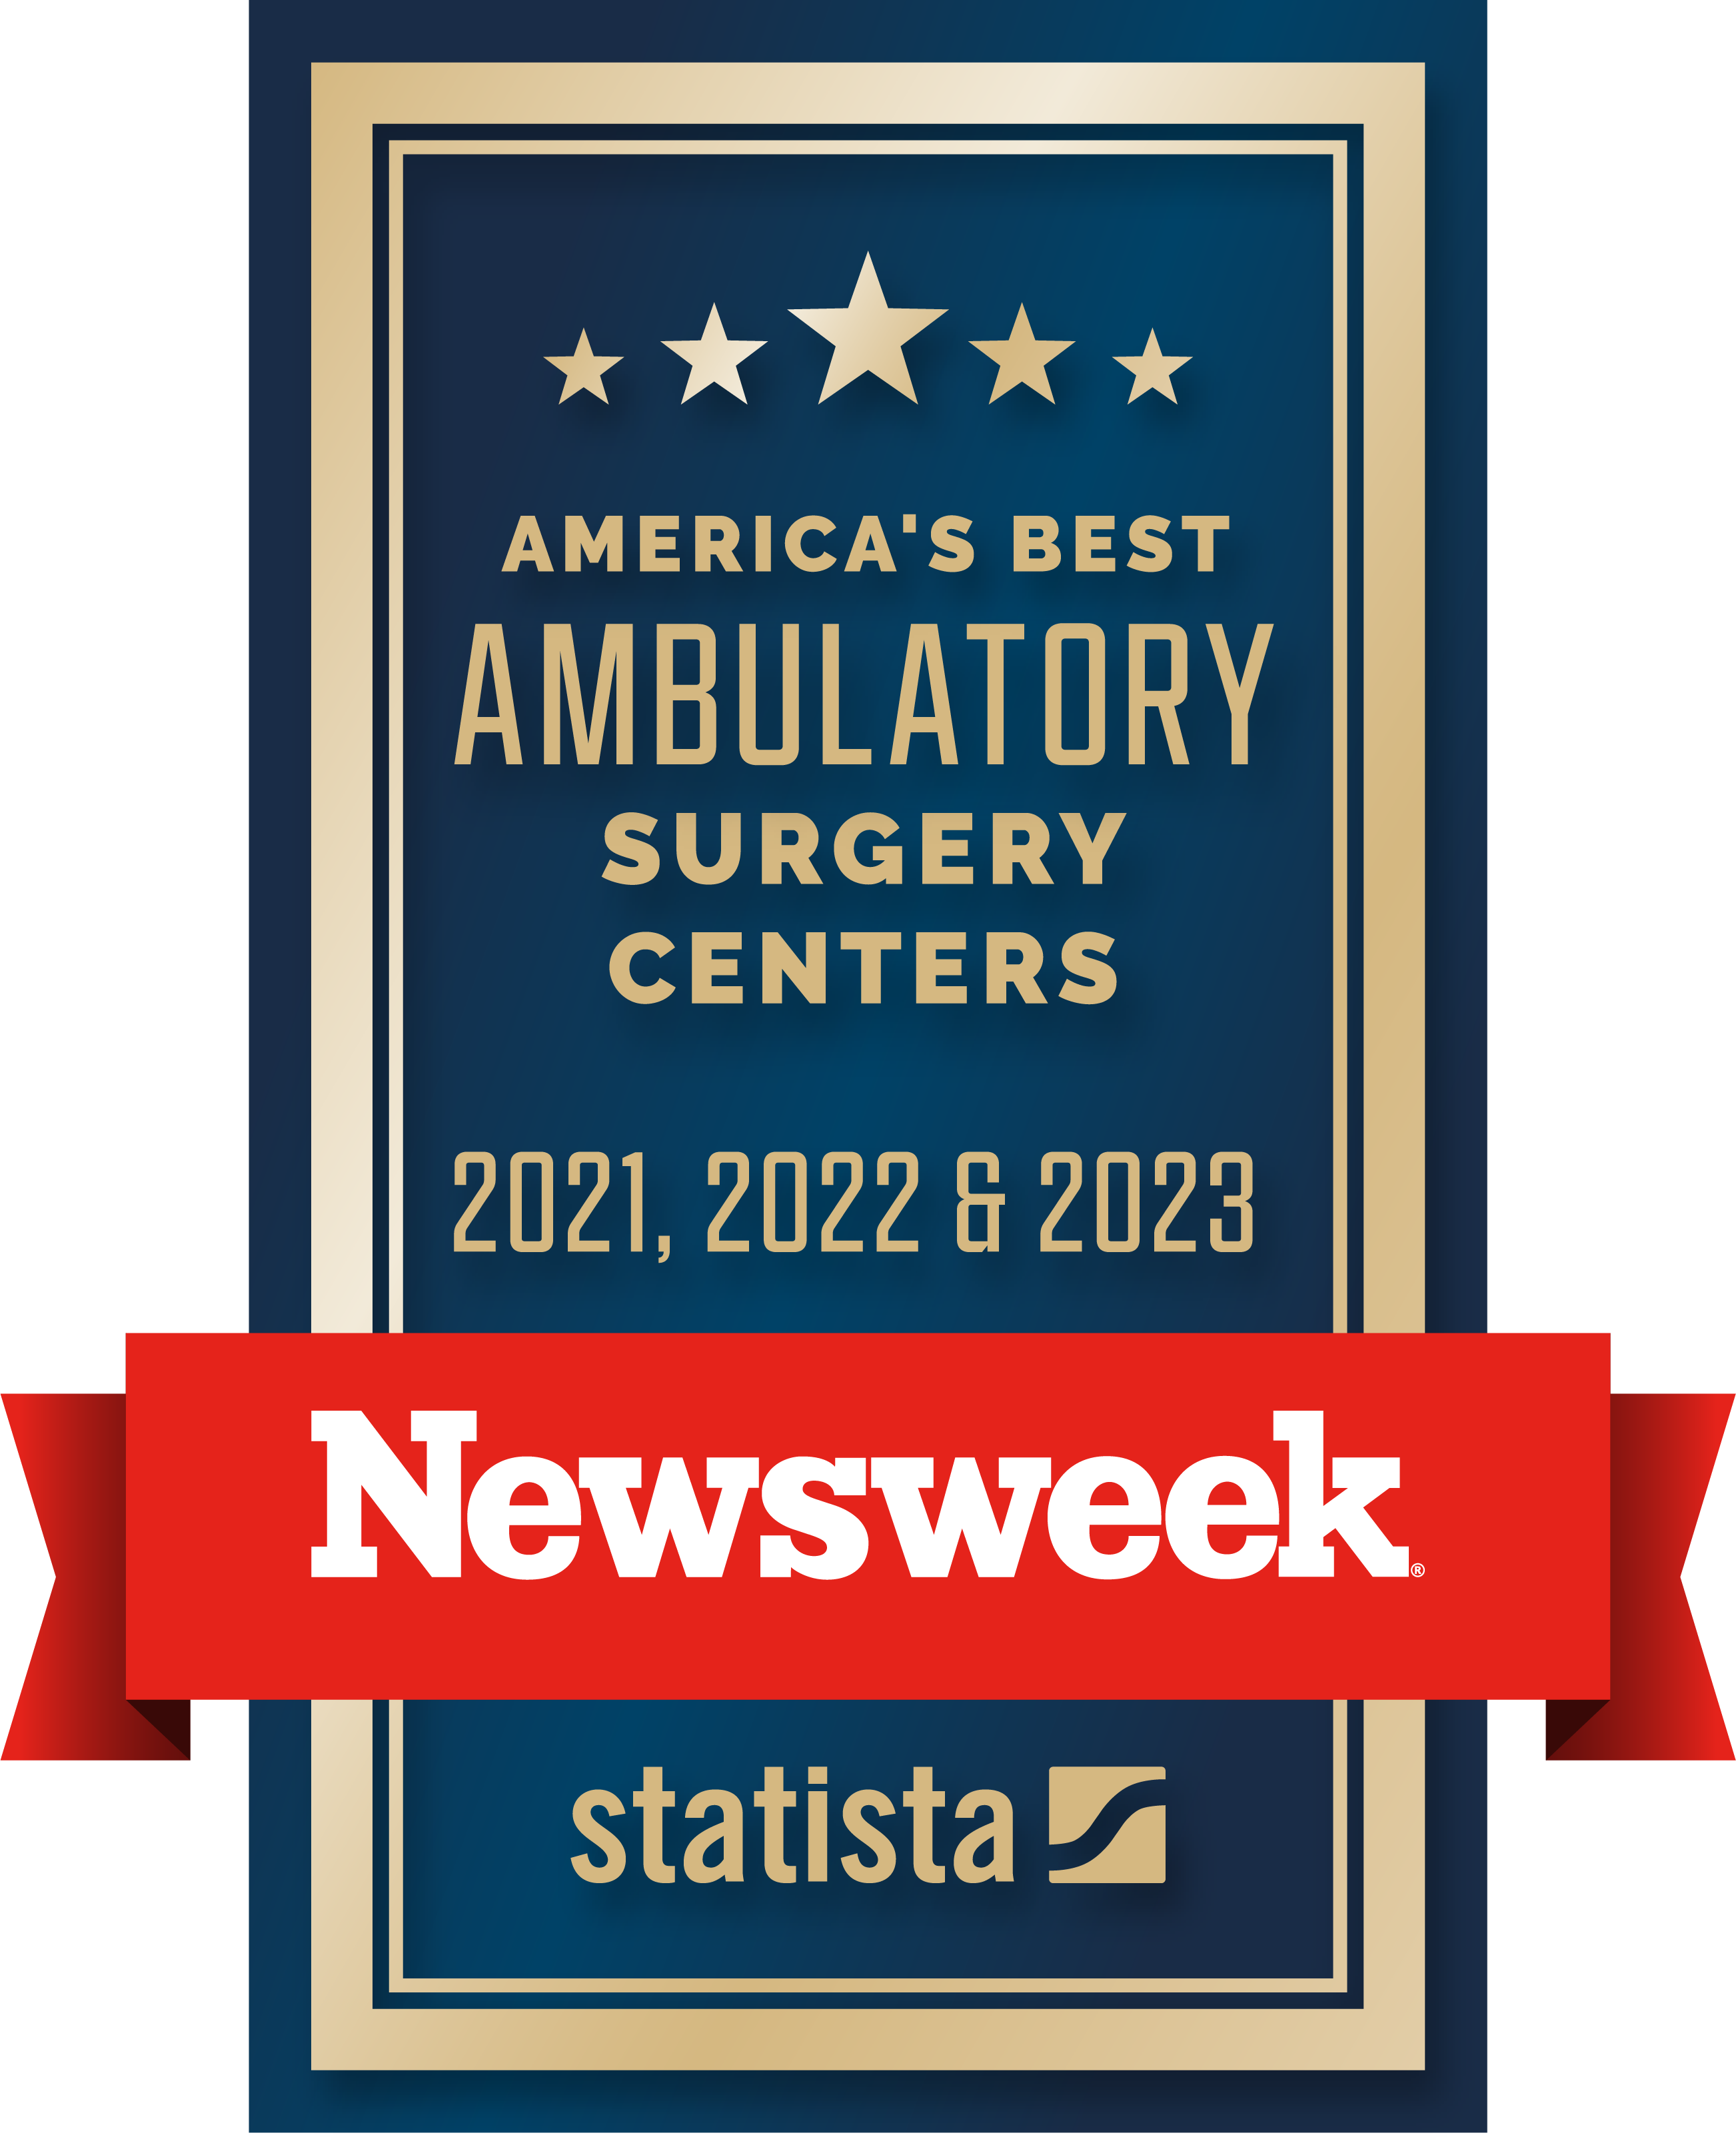 Best Ambulatory Surgery Centers for 2021, 2022, 2023.